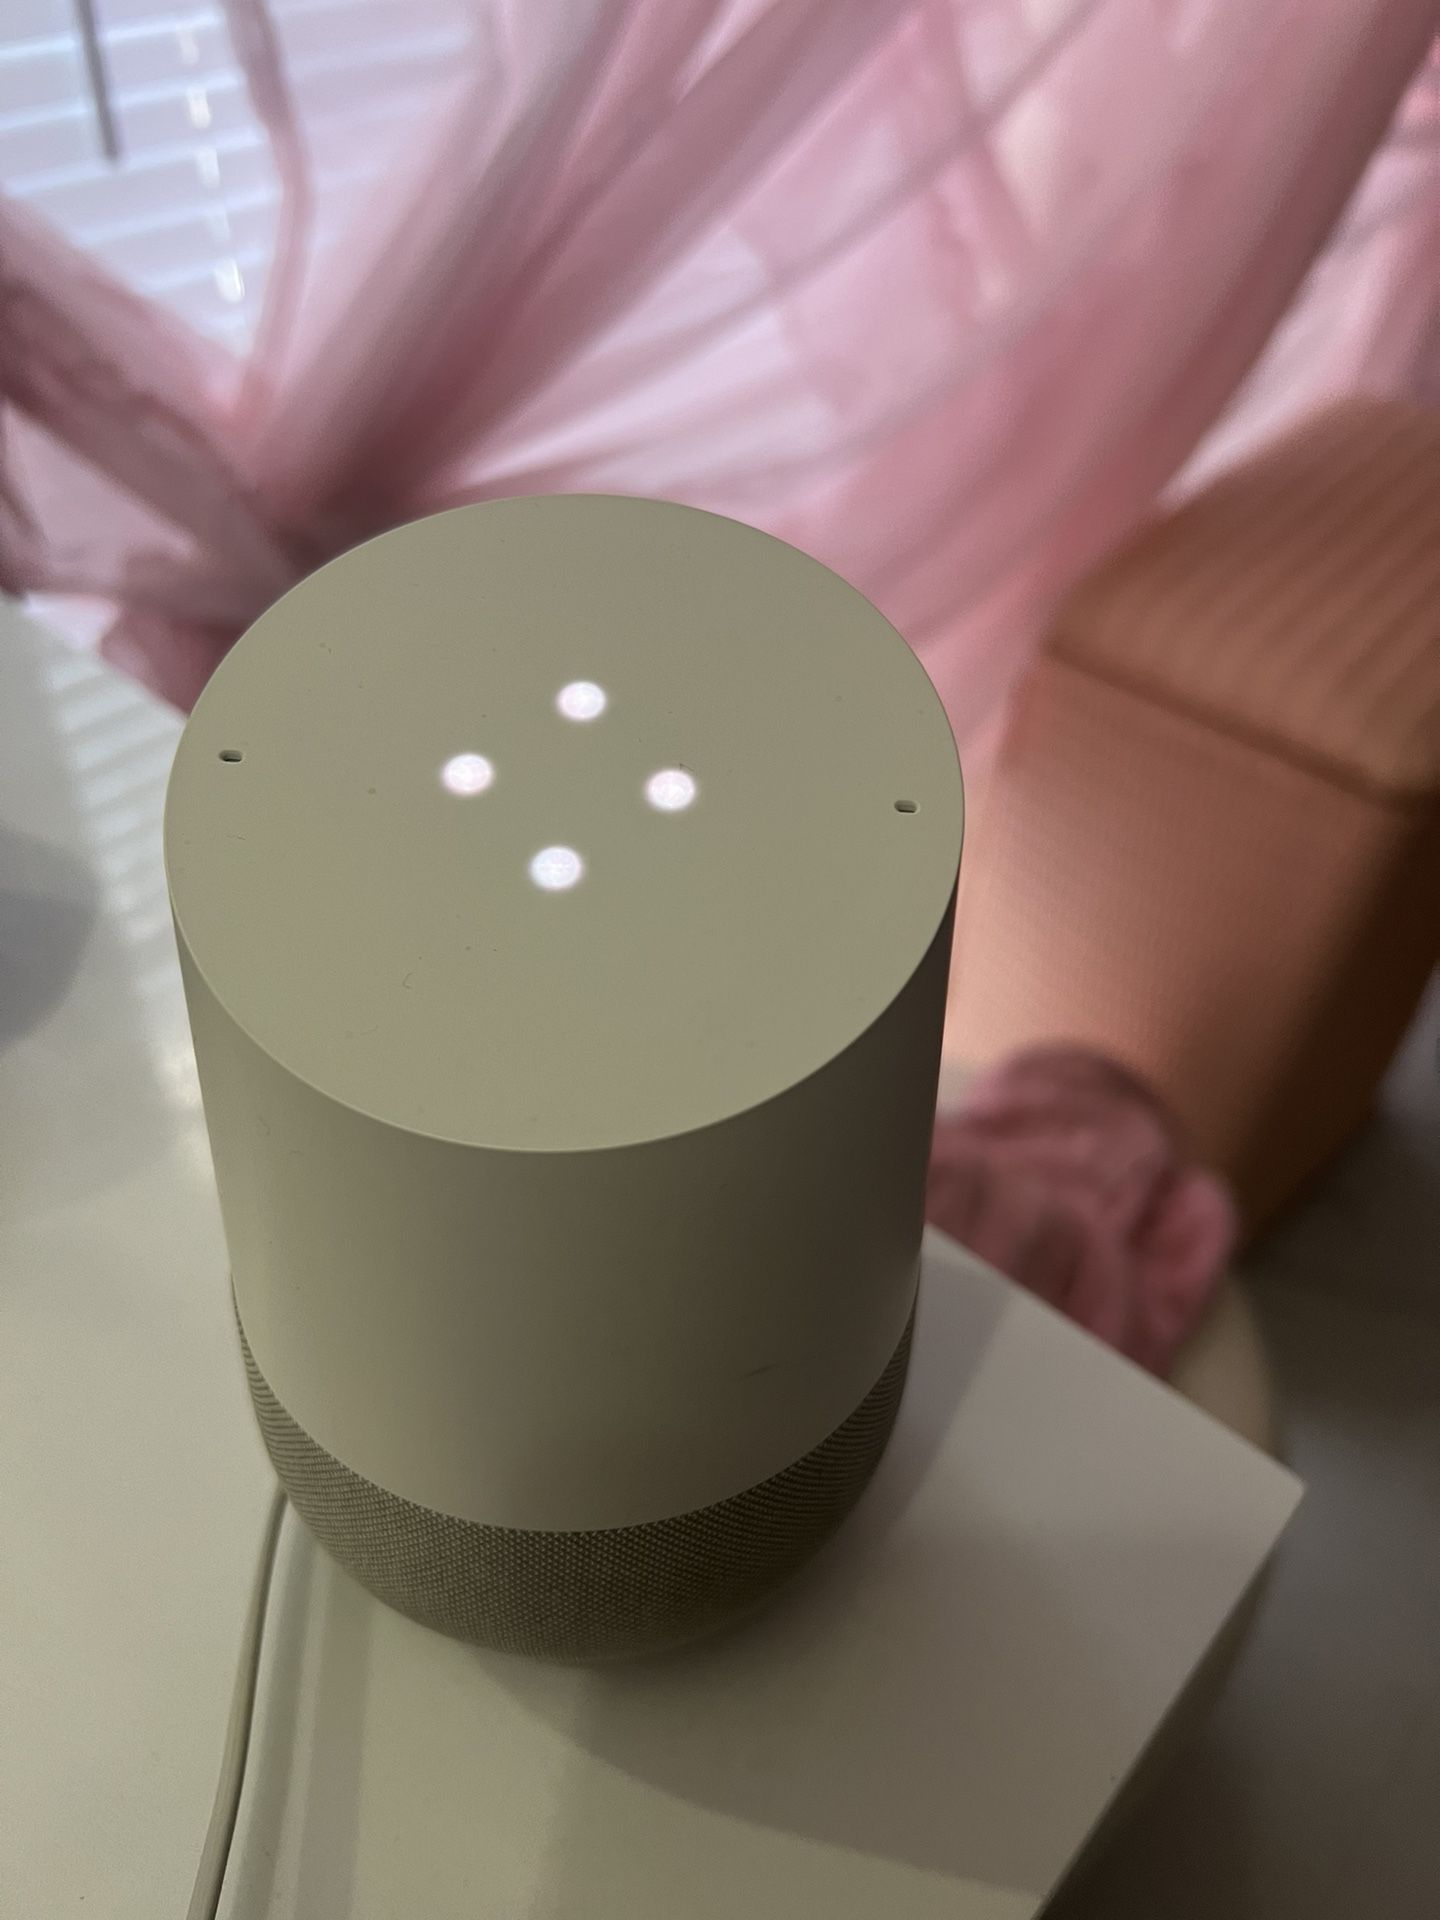 Google Home Tower